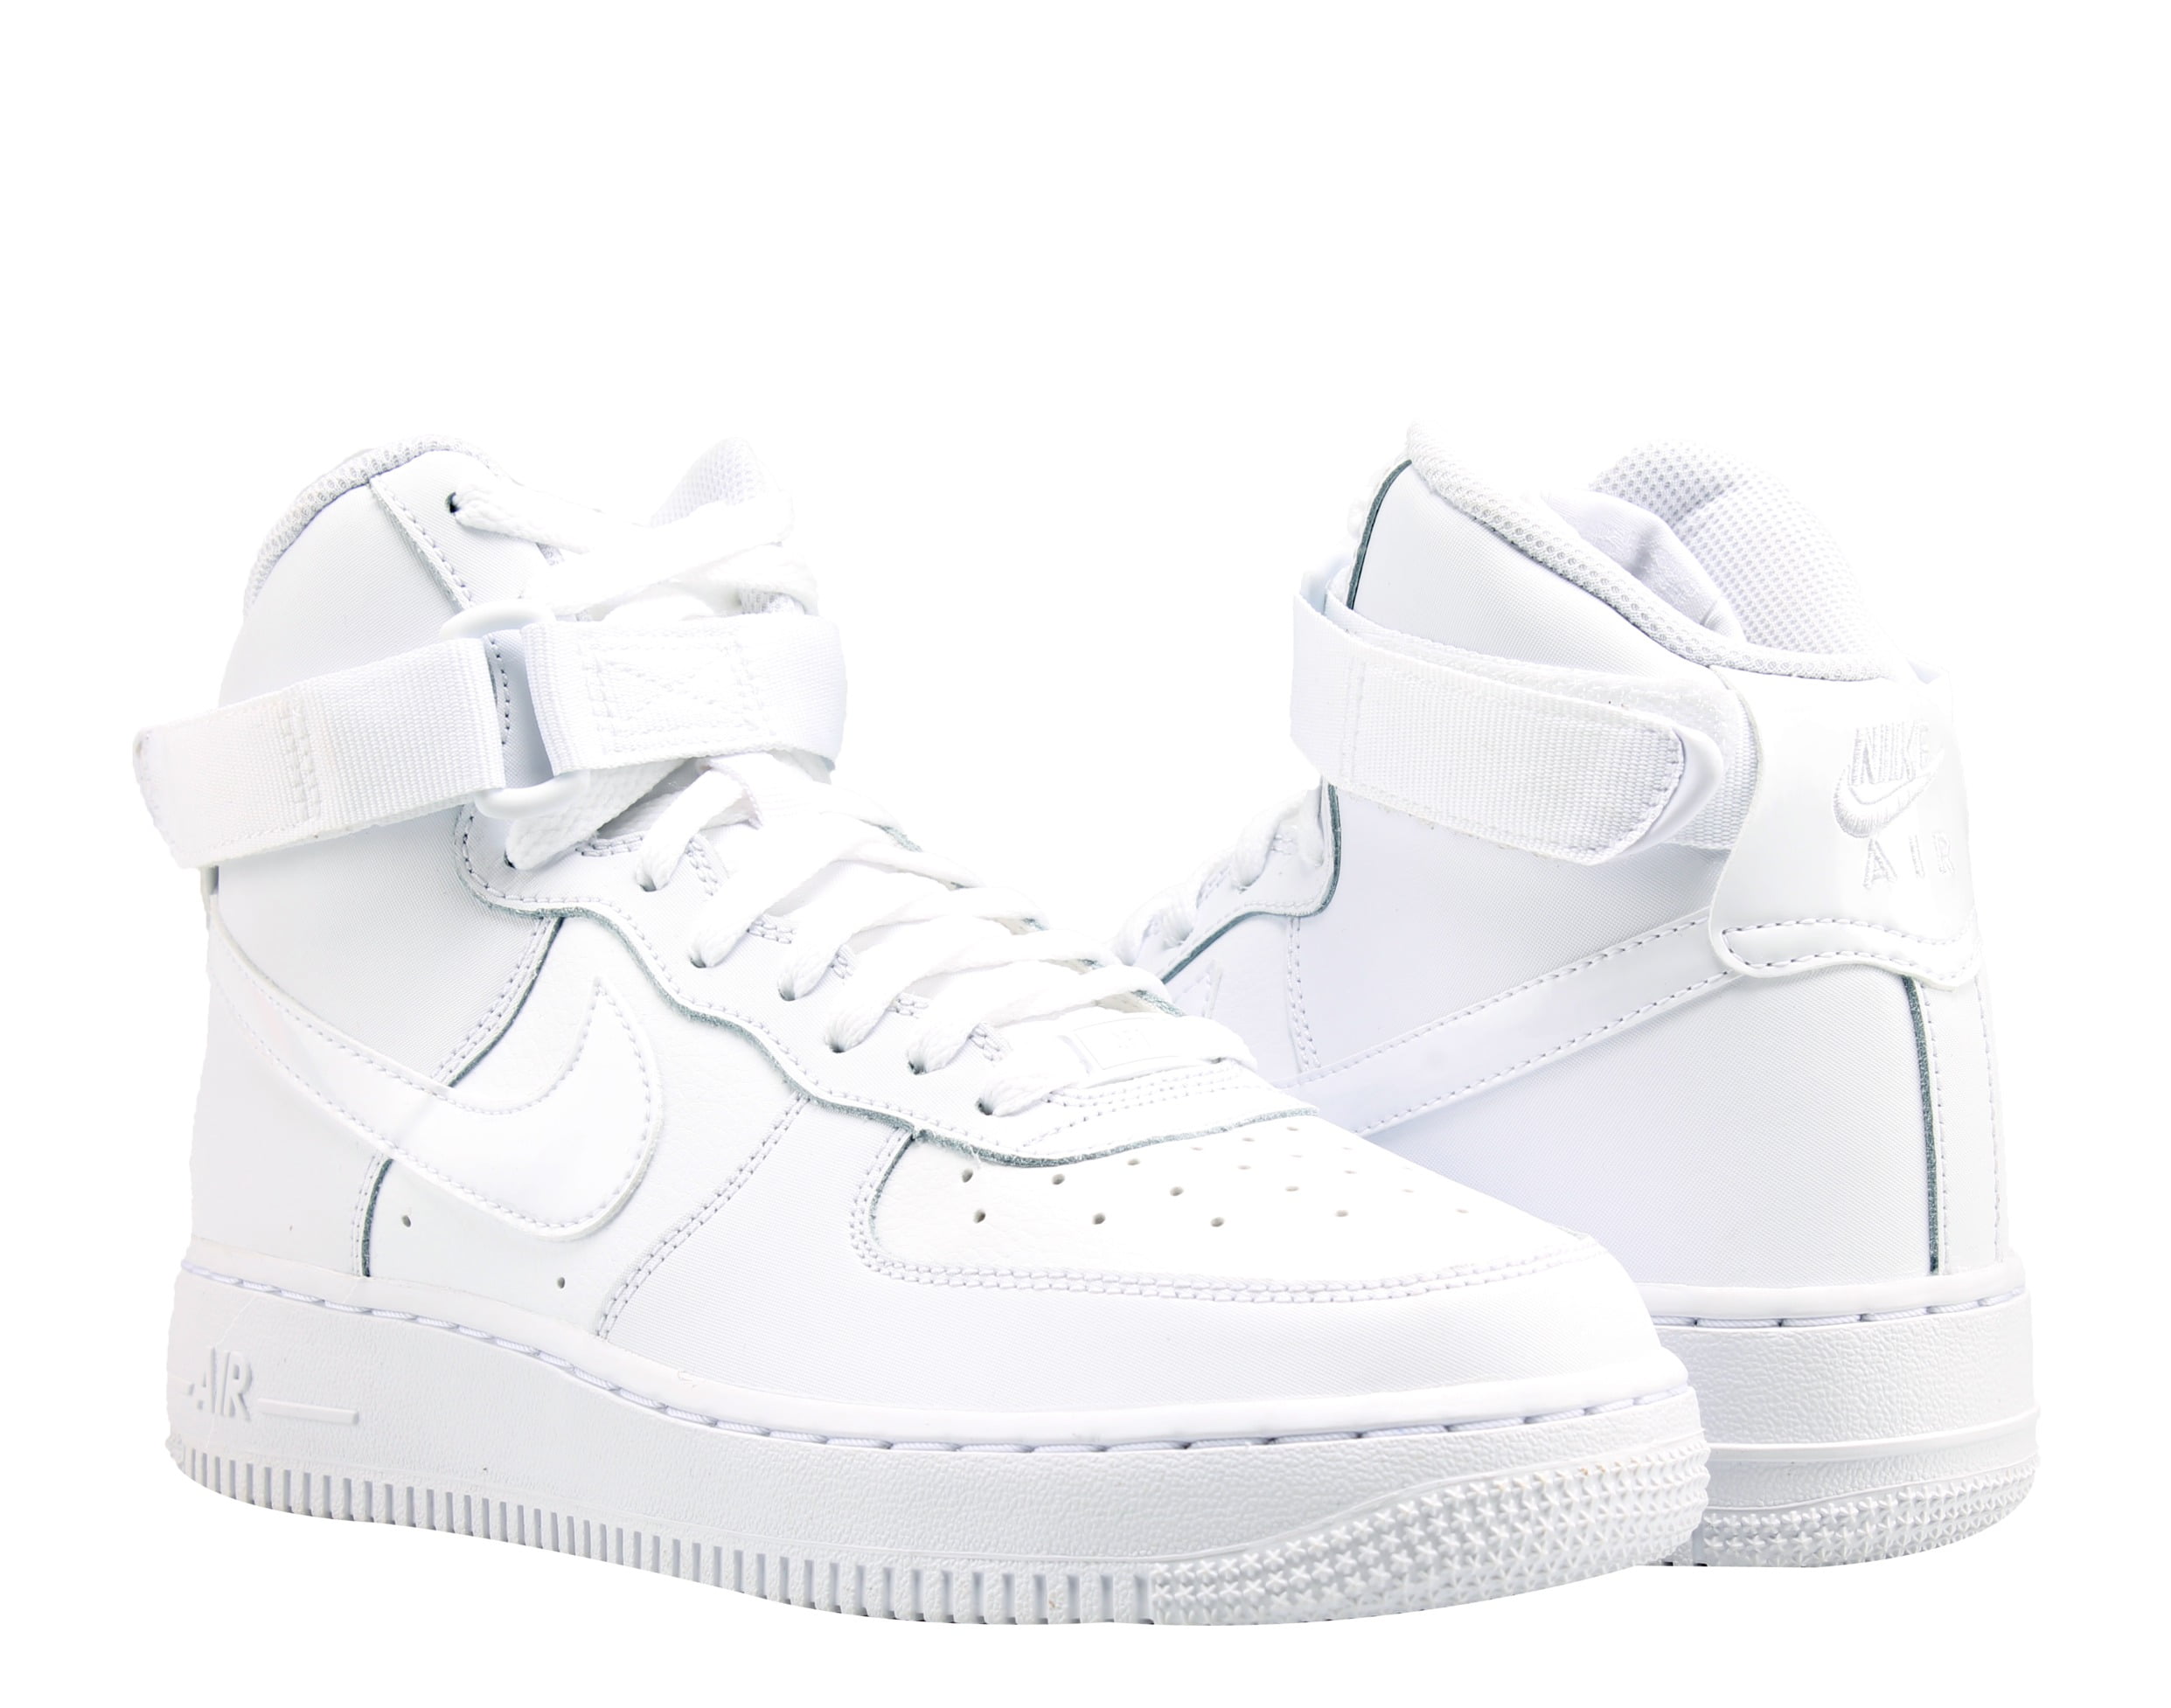 NIKE AIR FORCE 1 WHITE ALL WHITE SZ 4.5Y WOMENS WITH ORIGINAL RETAIL BOX  USED